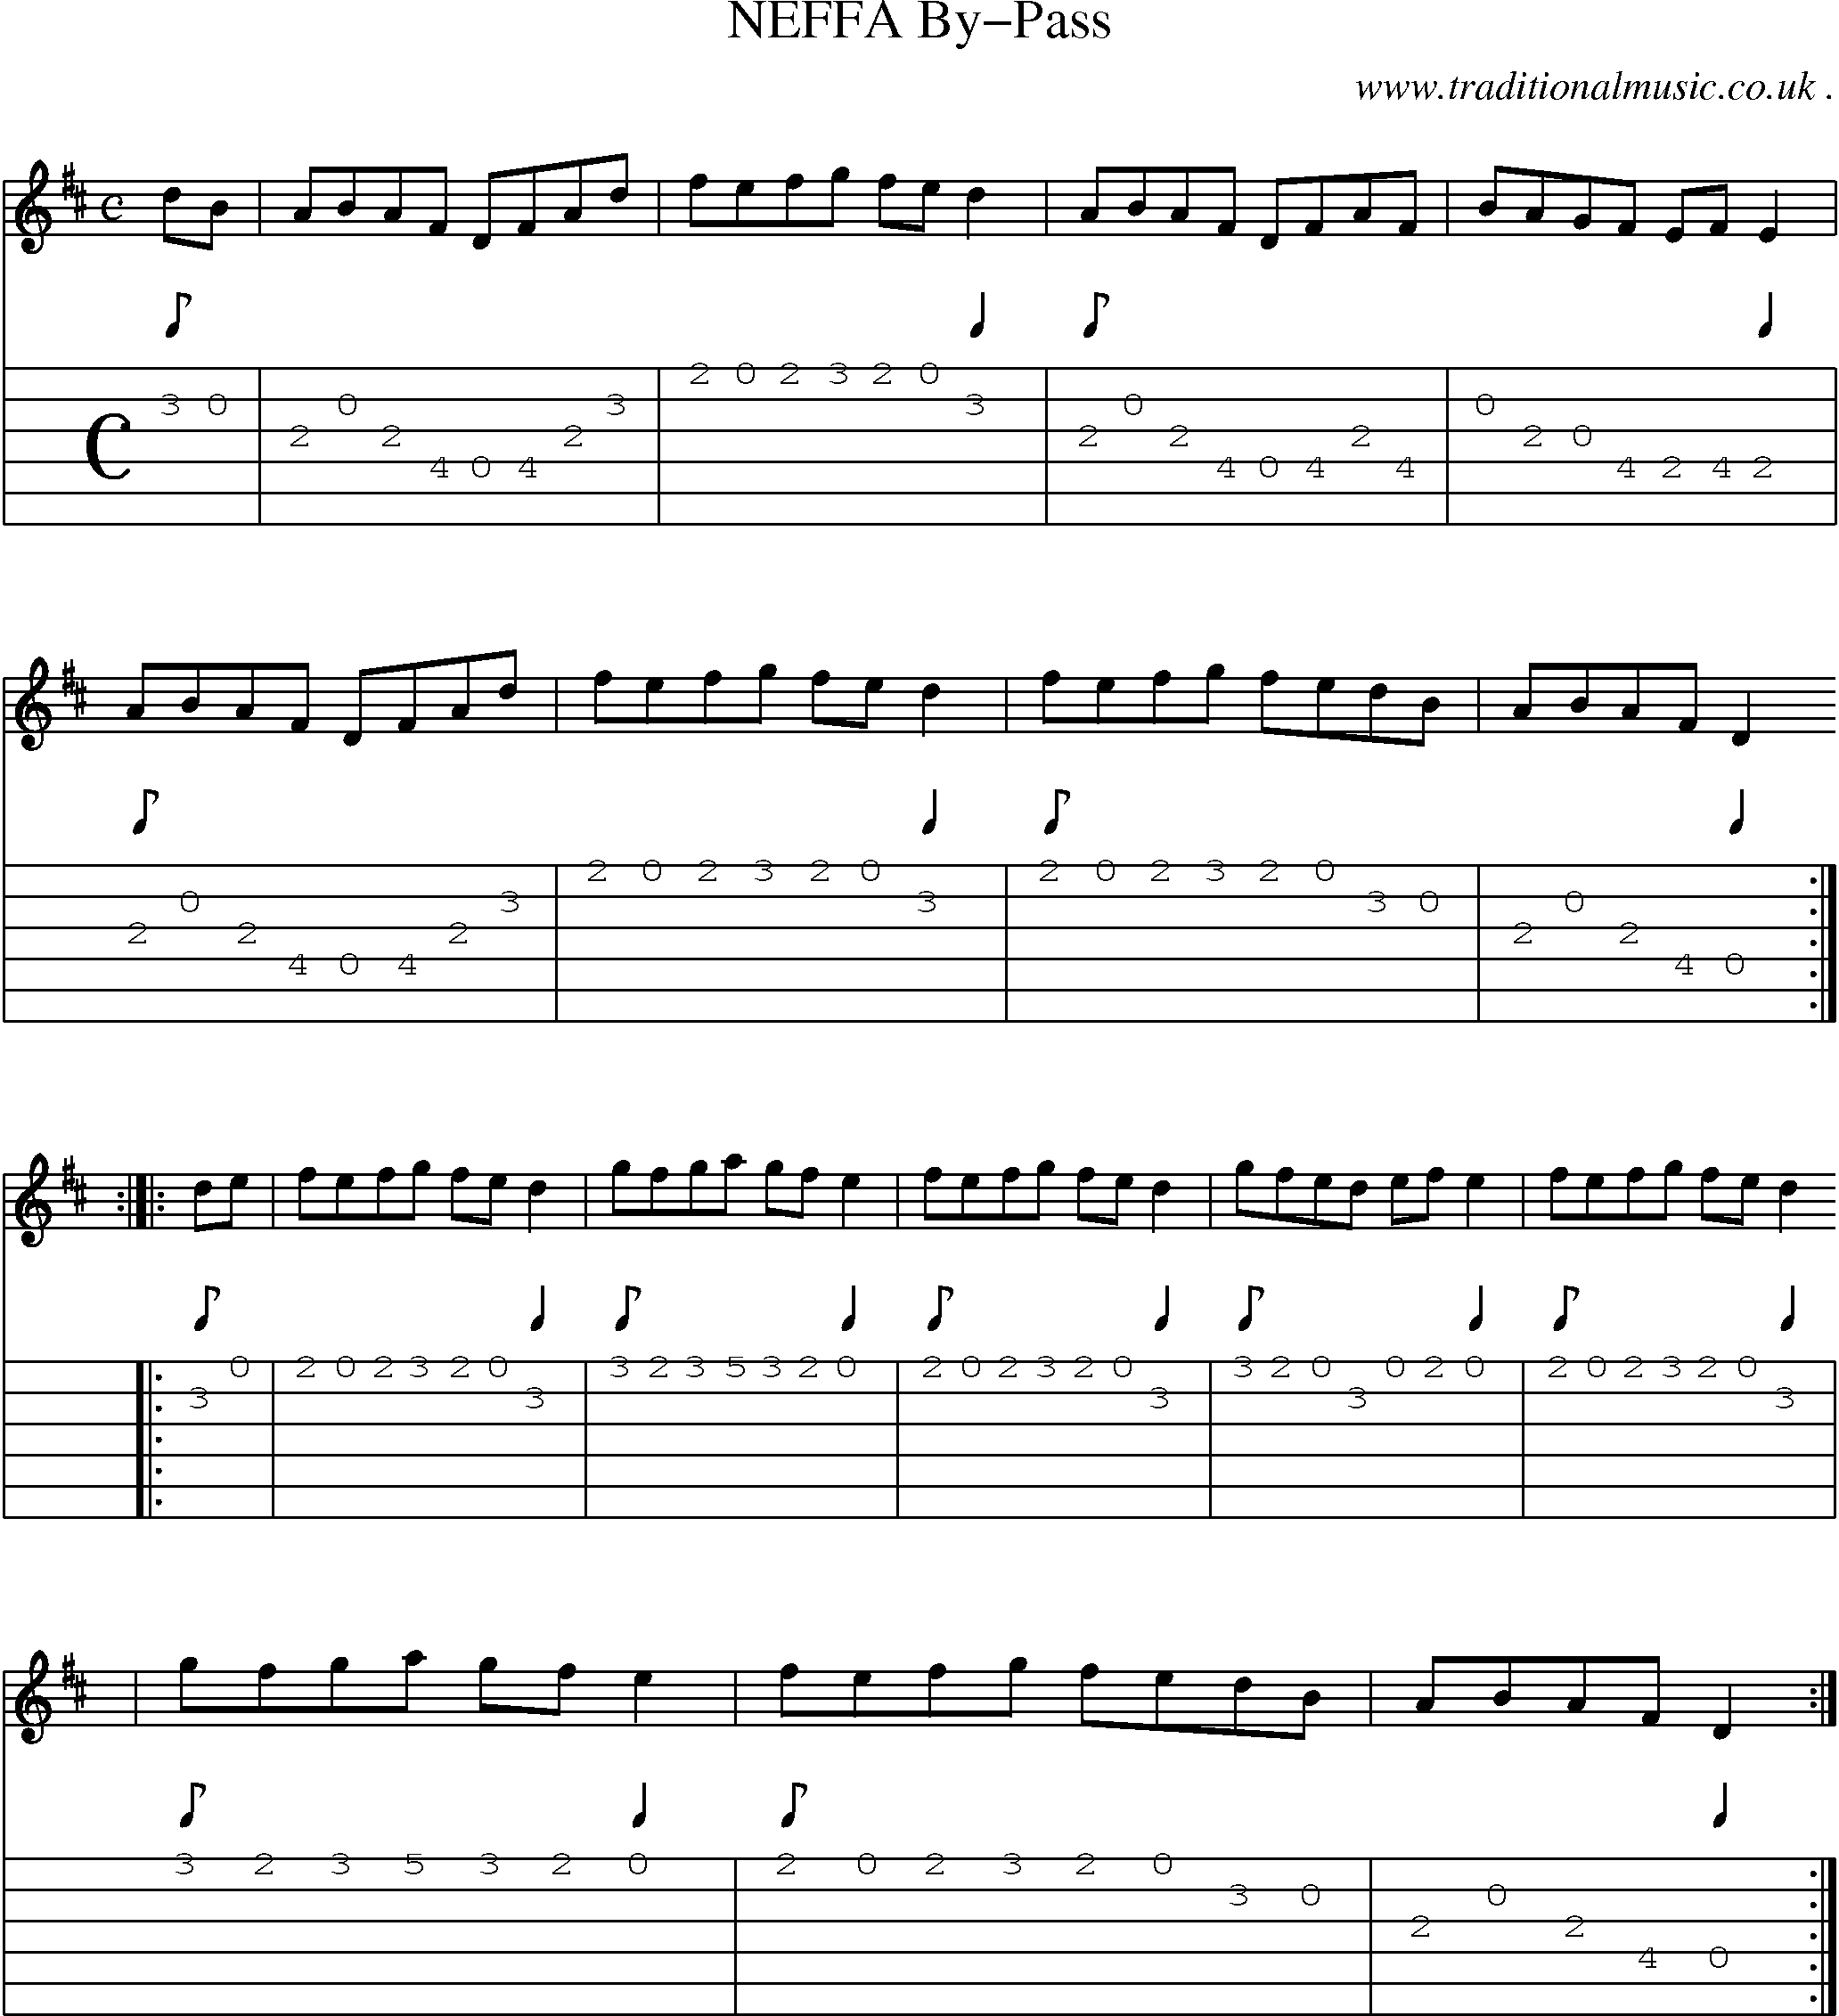 Sheet-Music and Guitar Tabs for Neffa By-pass